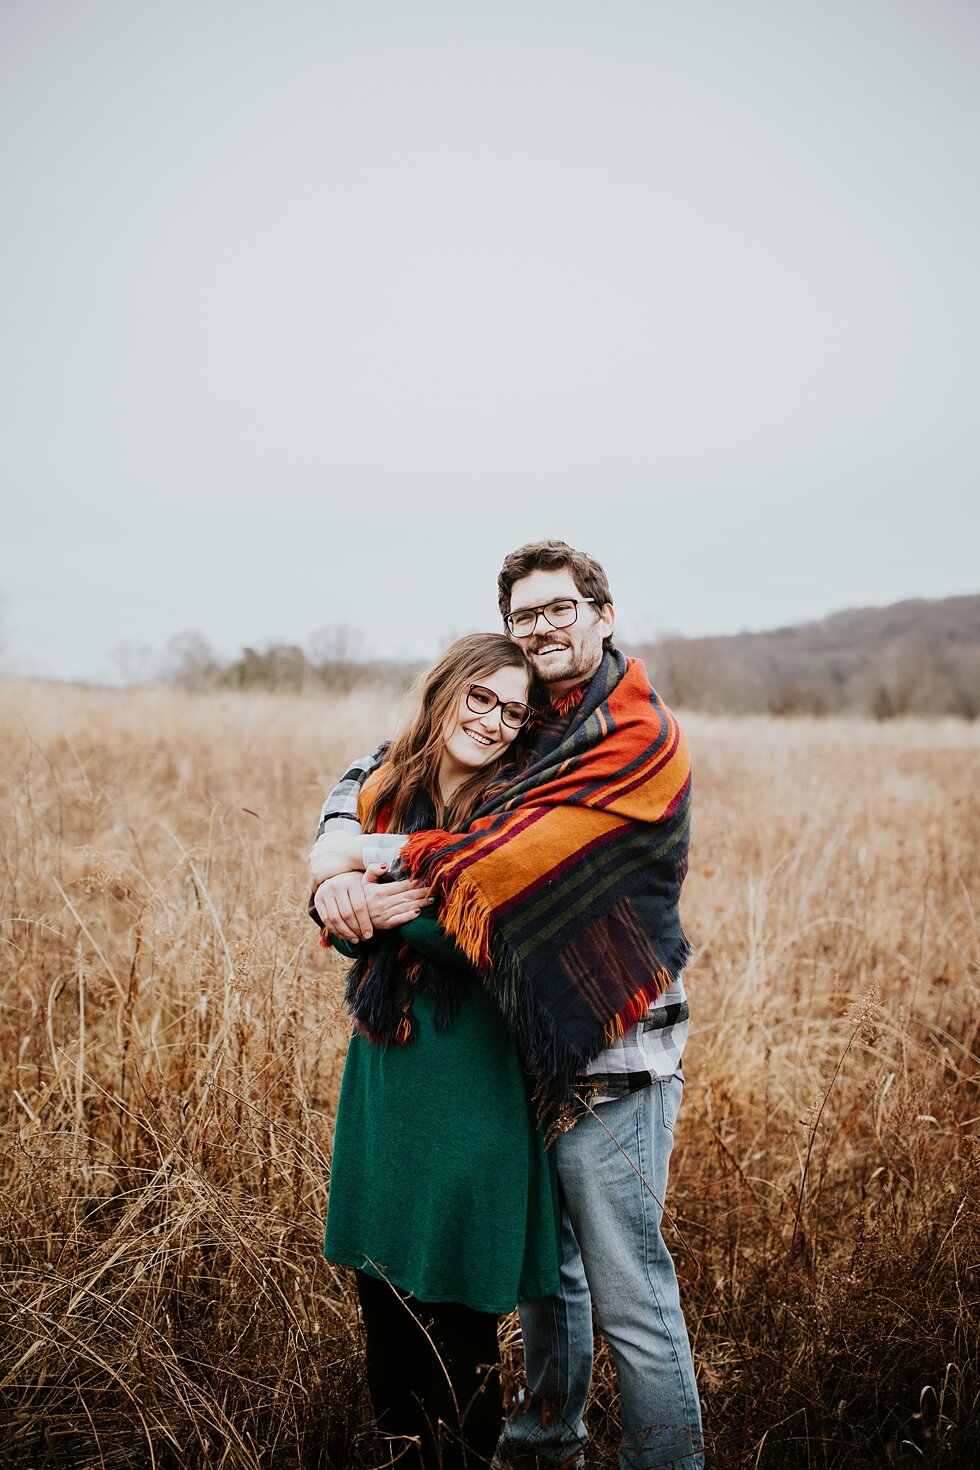  Engagement goals for this couple as they huddle under a stunning bright orange and red blanket on this rainy winter day in Kentucky. Louisville photographer winter engagement Bernheim Forest emerald green dress plaid shirt rainy day Kentucky couple 